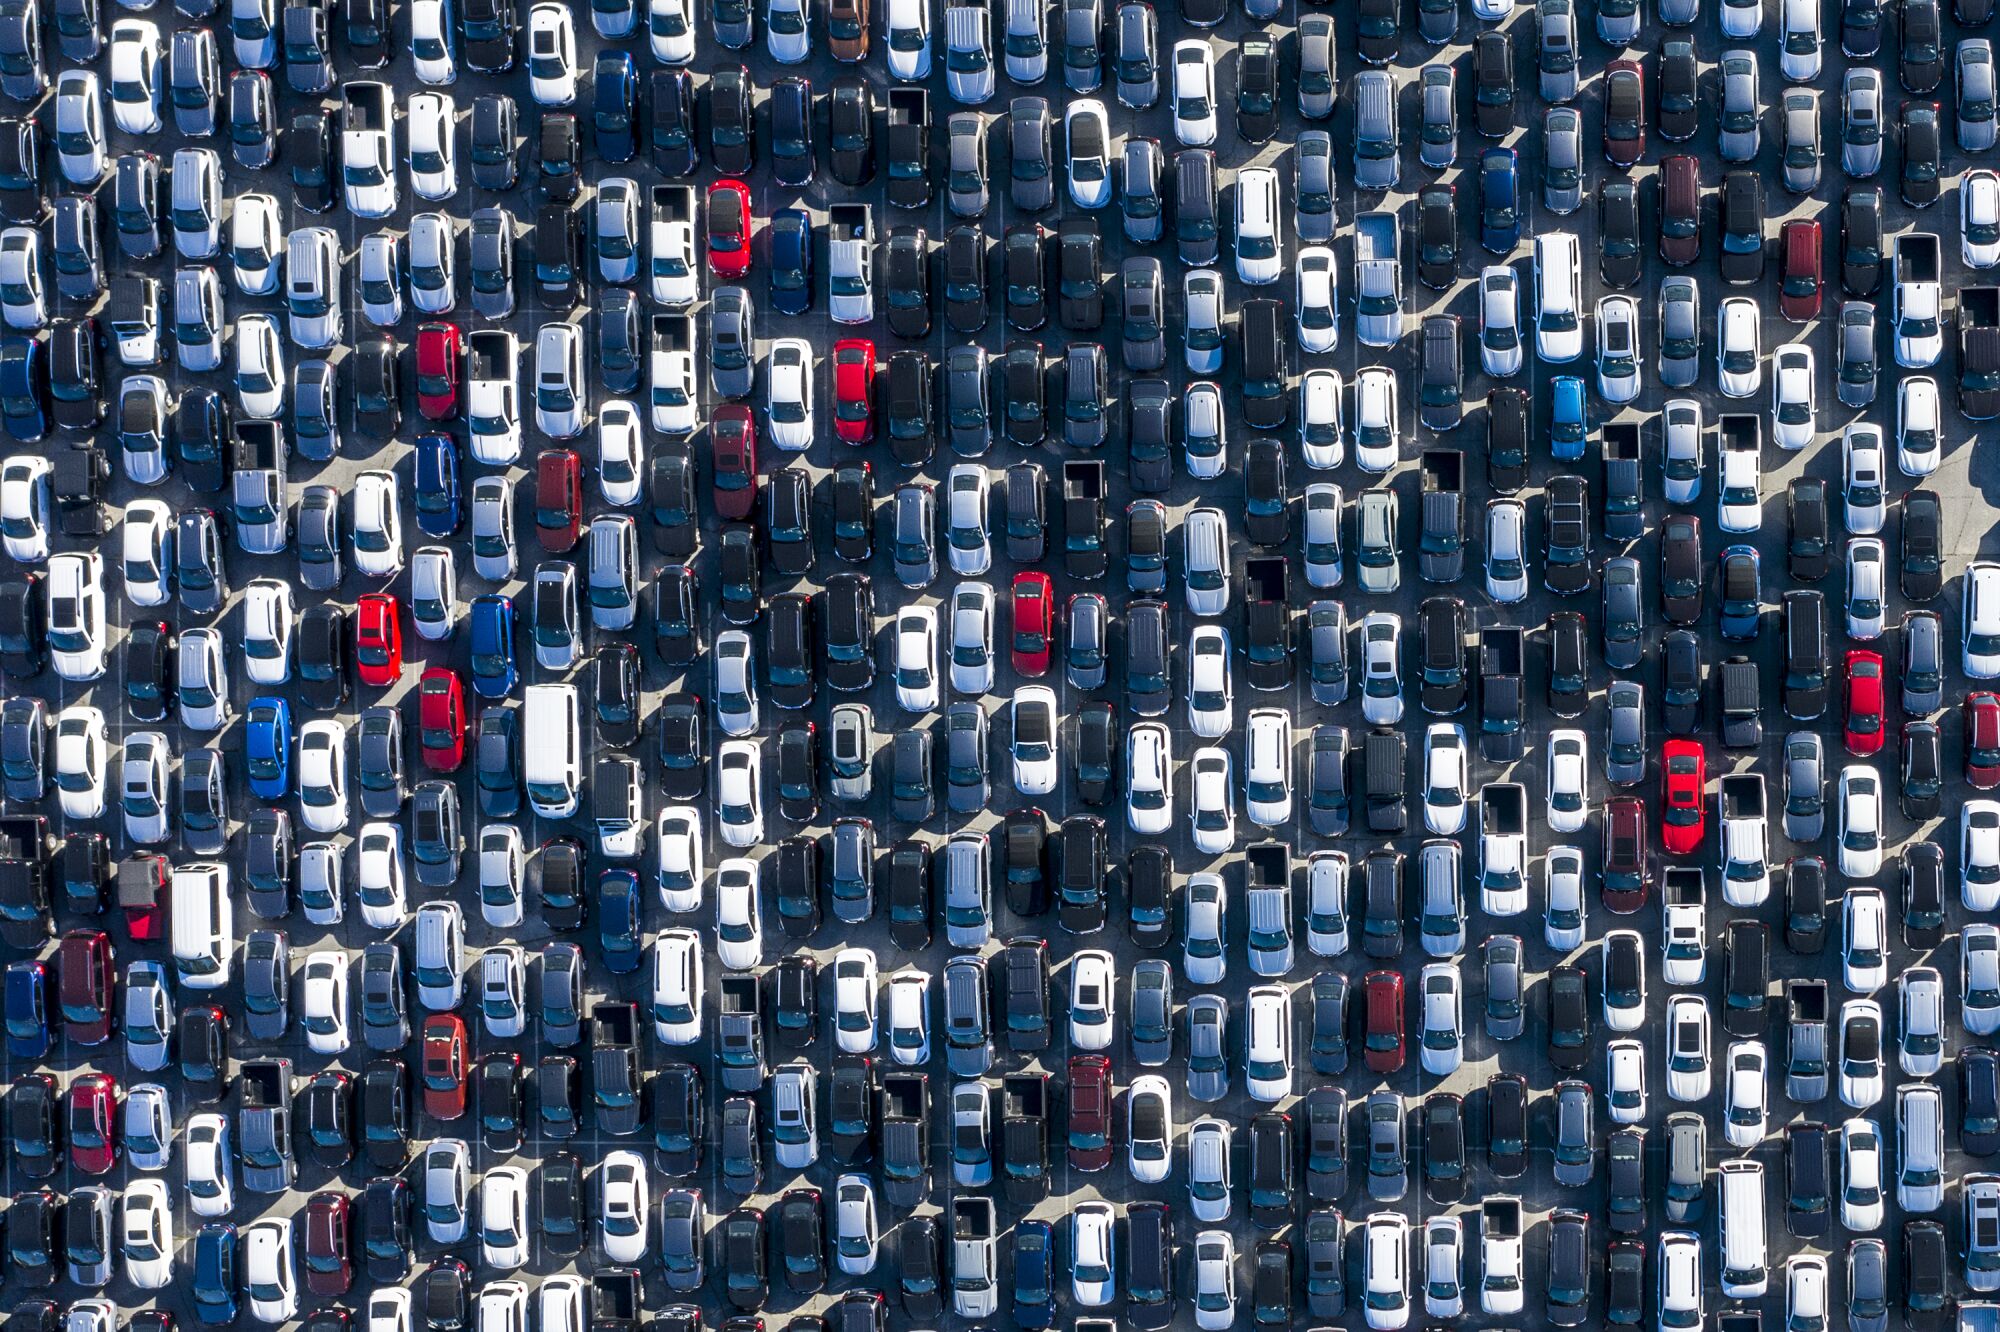  Thousands of rental cars are stored at Dodger Stadium